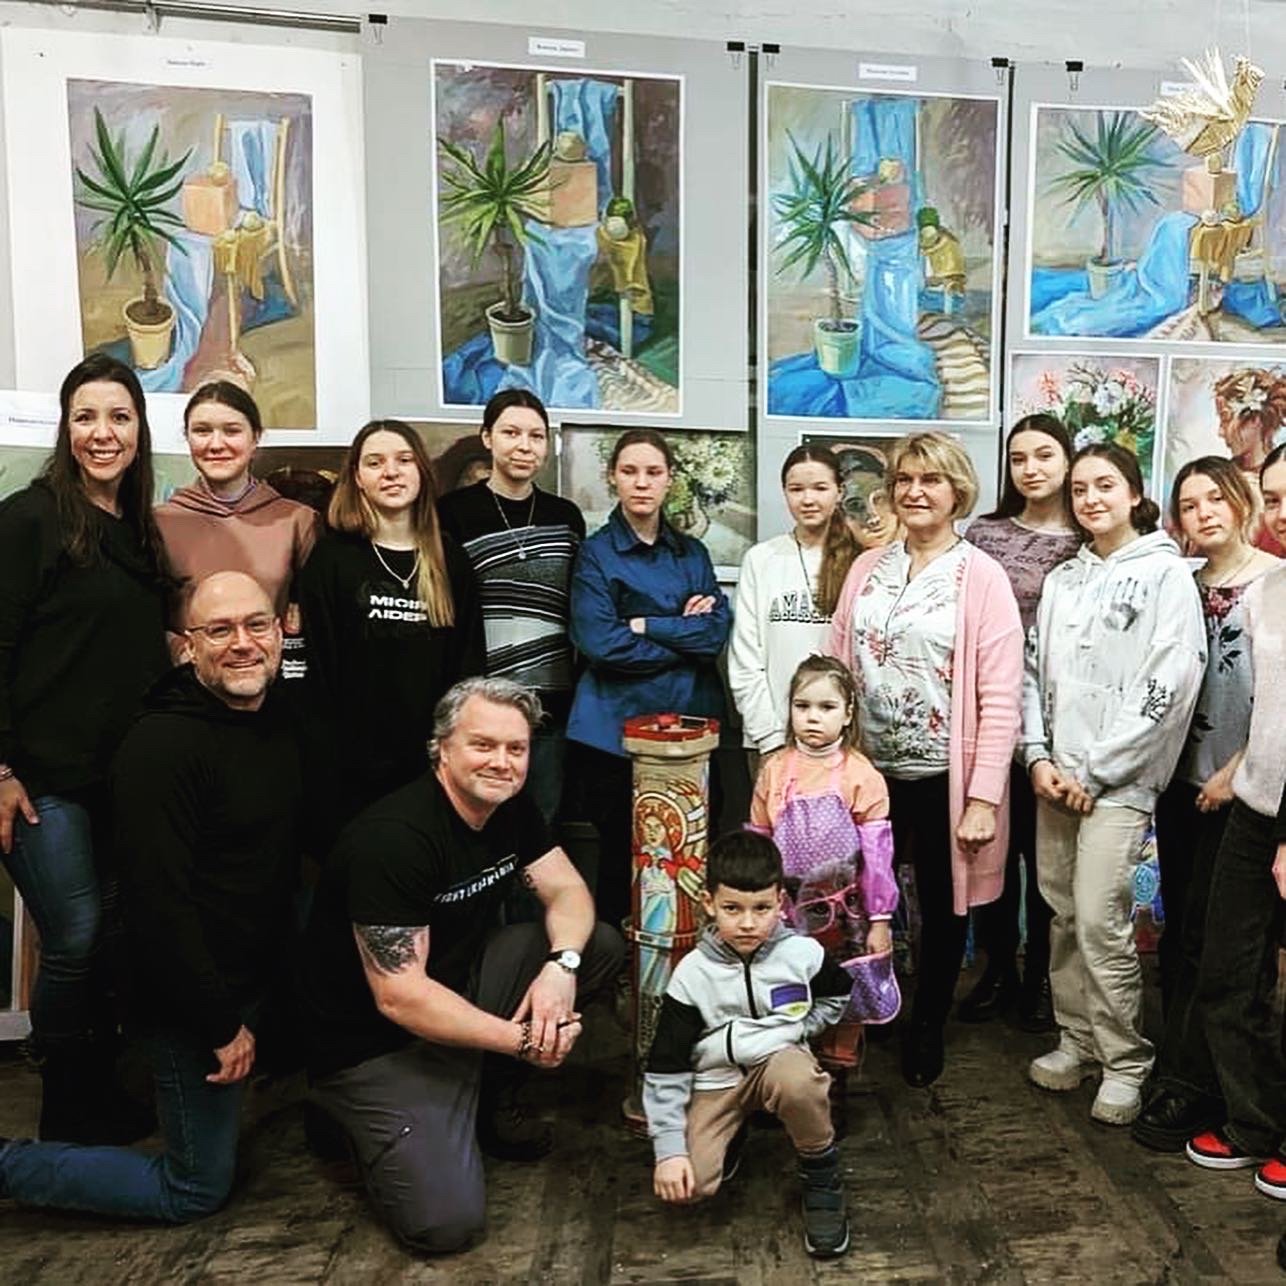 We were guests at The Lutsk Art School and learned how their art programs &amp; art therapy programs are helping children &amp; adults process the impact of the war.